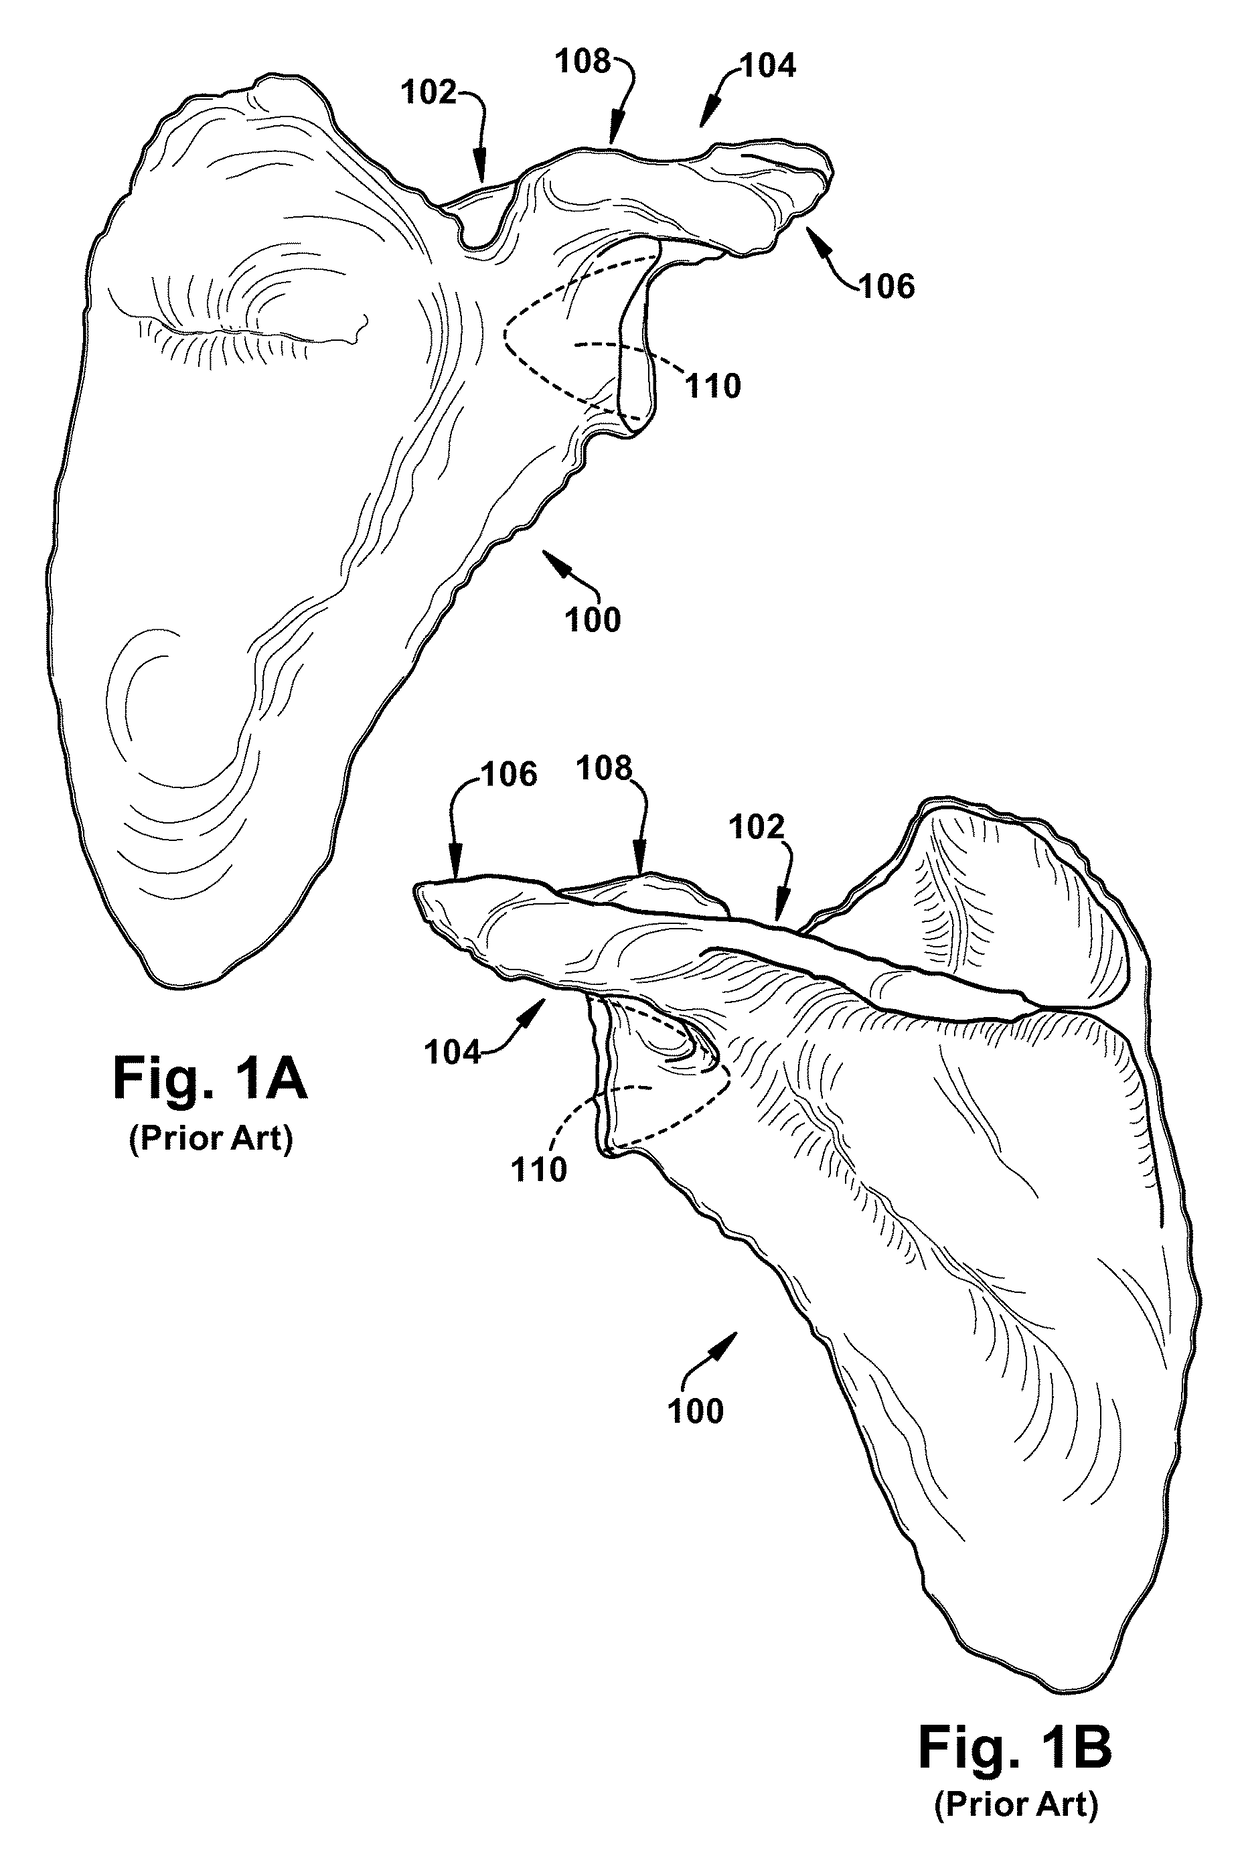 System of preoperative planning and provision of patient-specific surgical aids